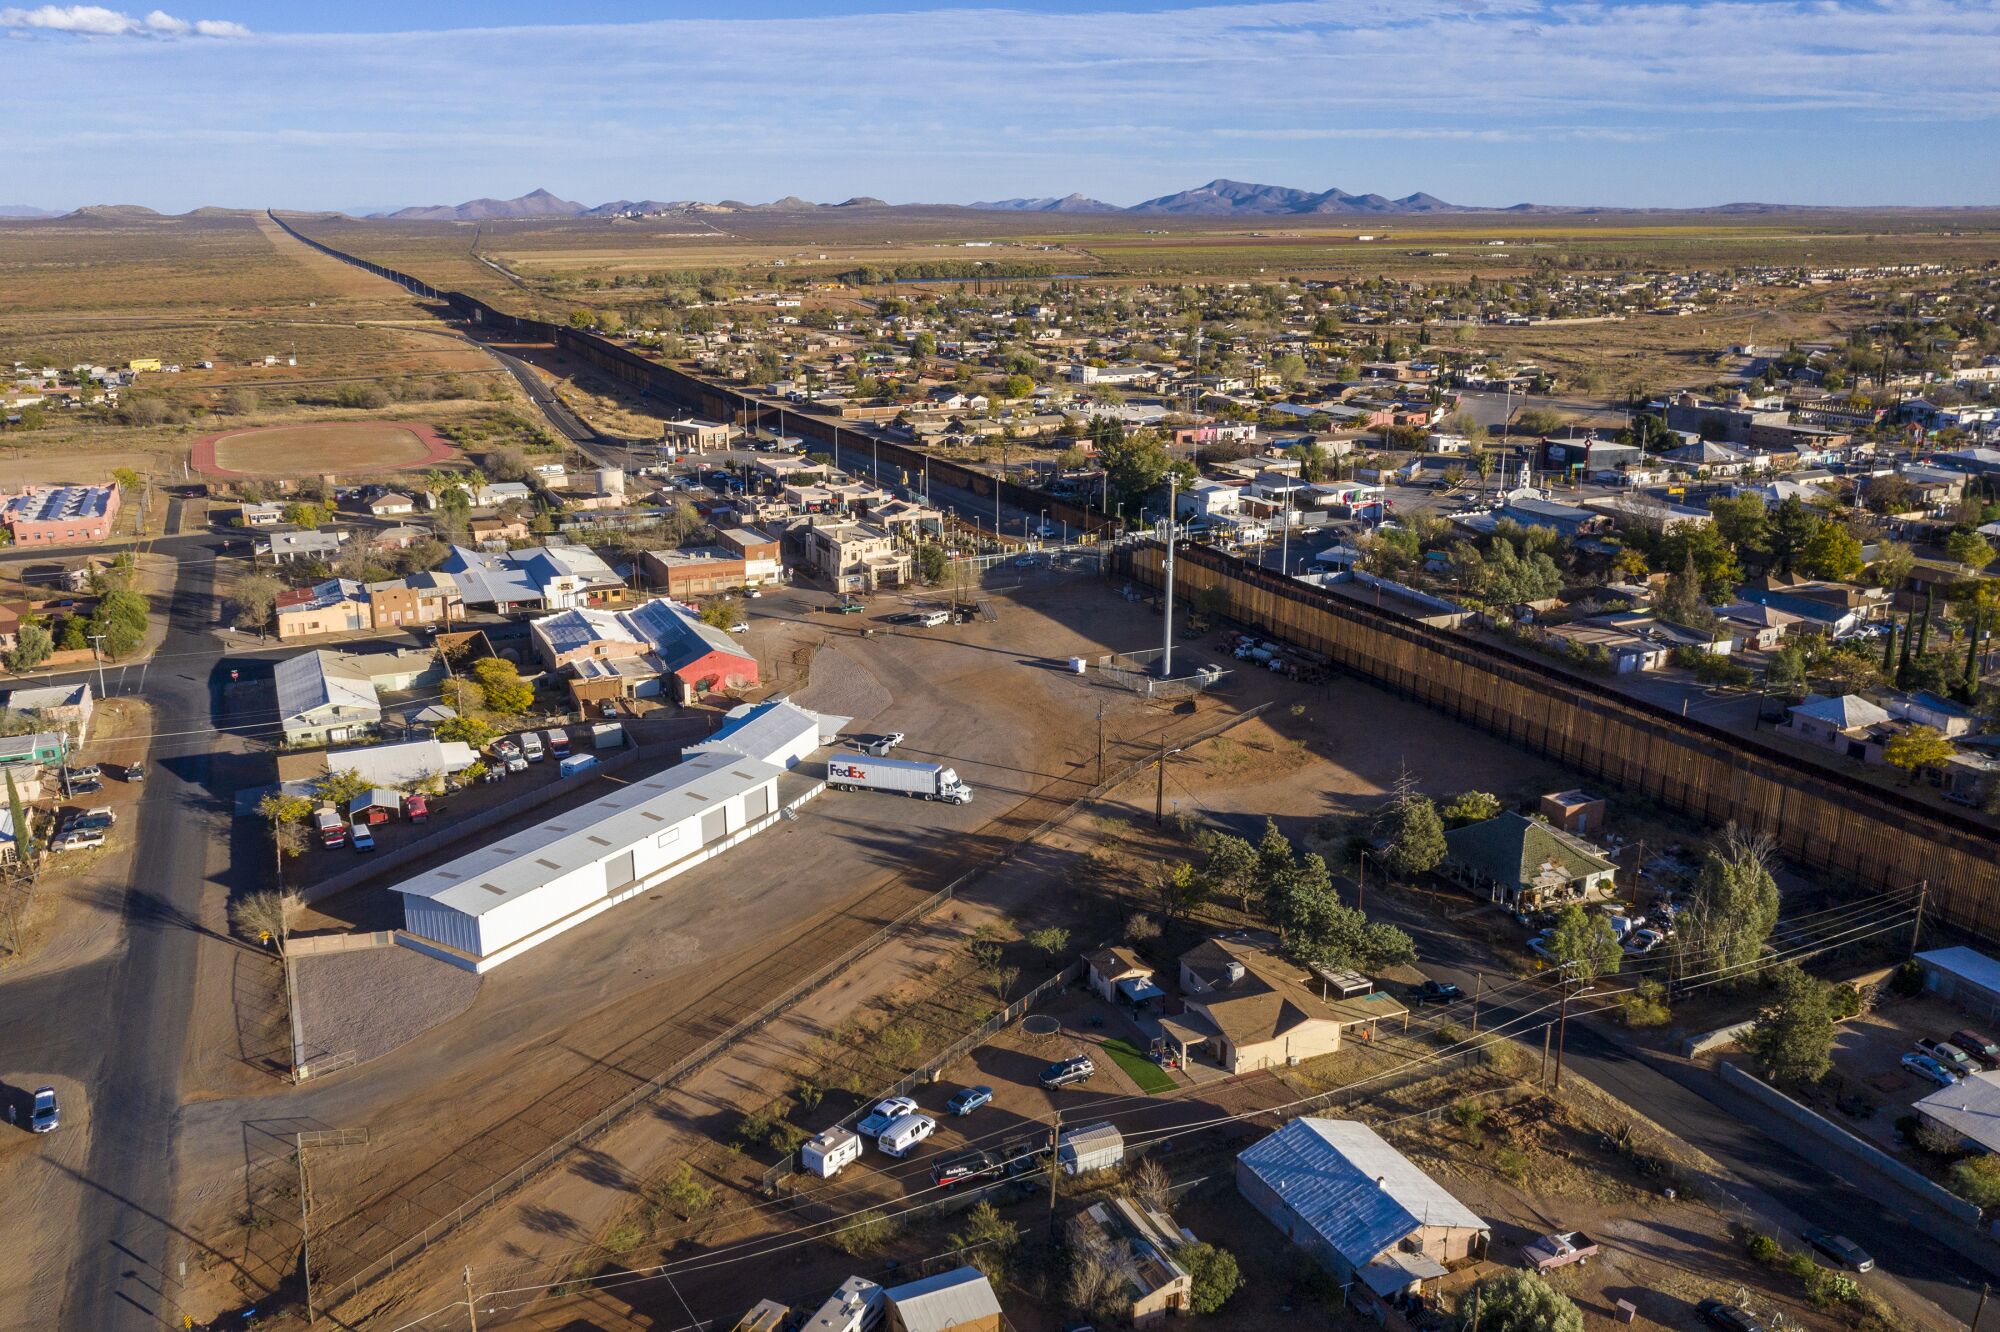 The Arizona town of Naco, left, and Sonora Mexico town of Naco, right, sit side by side, separated by the steel border wall.